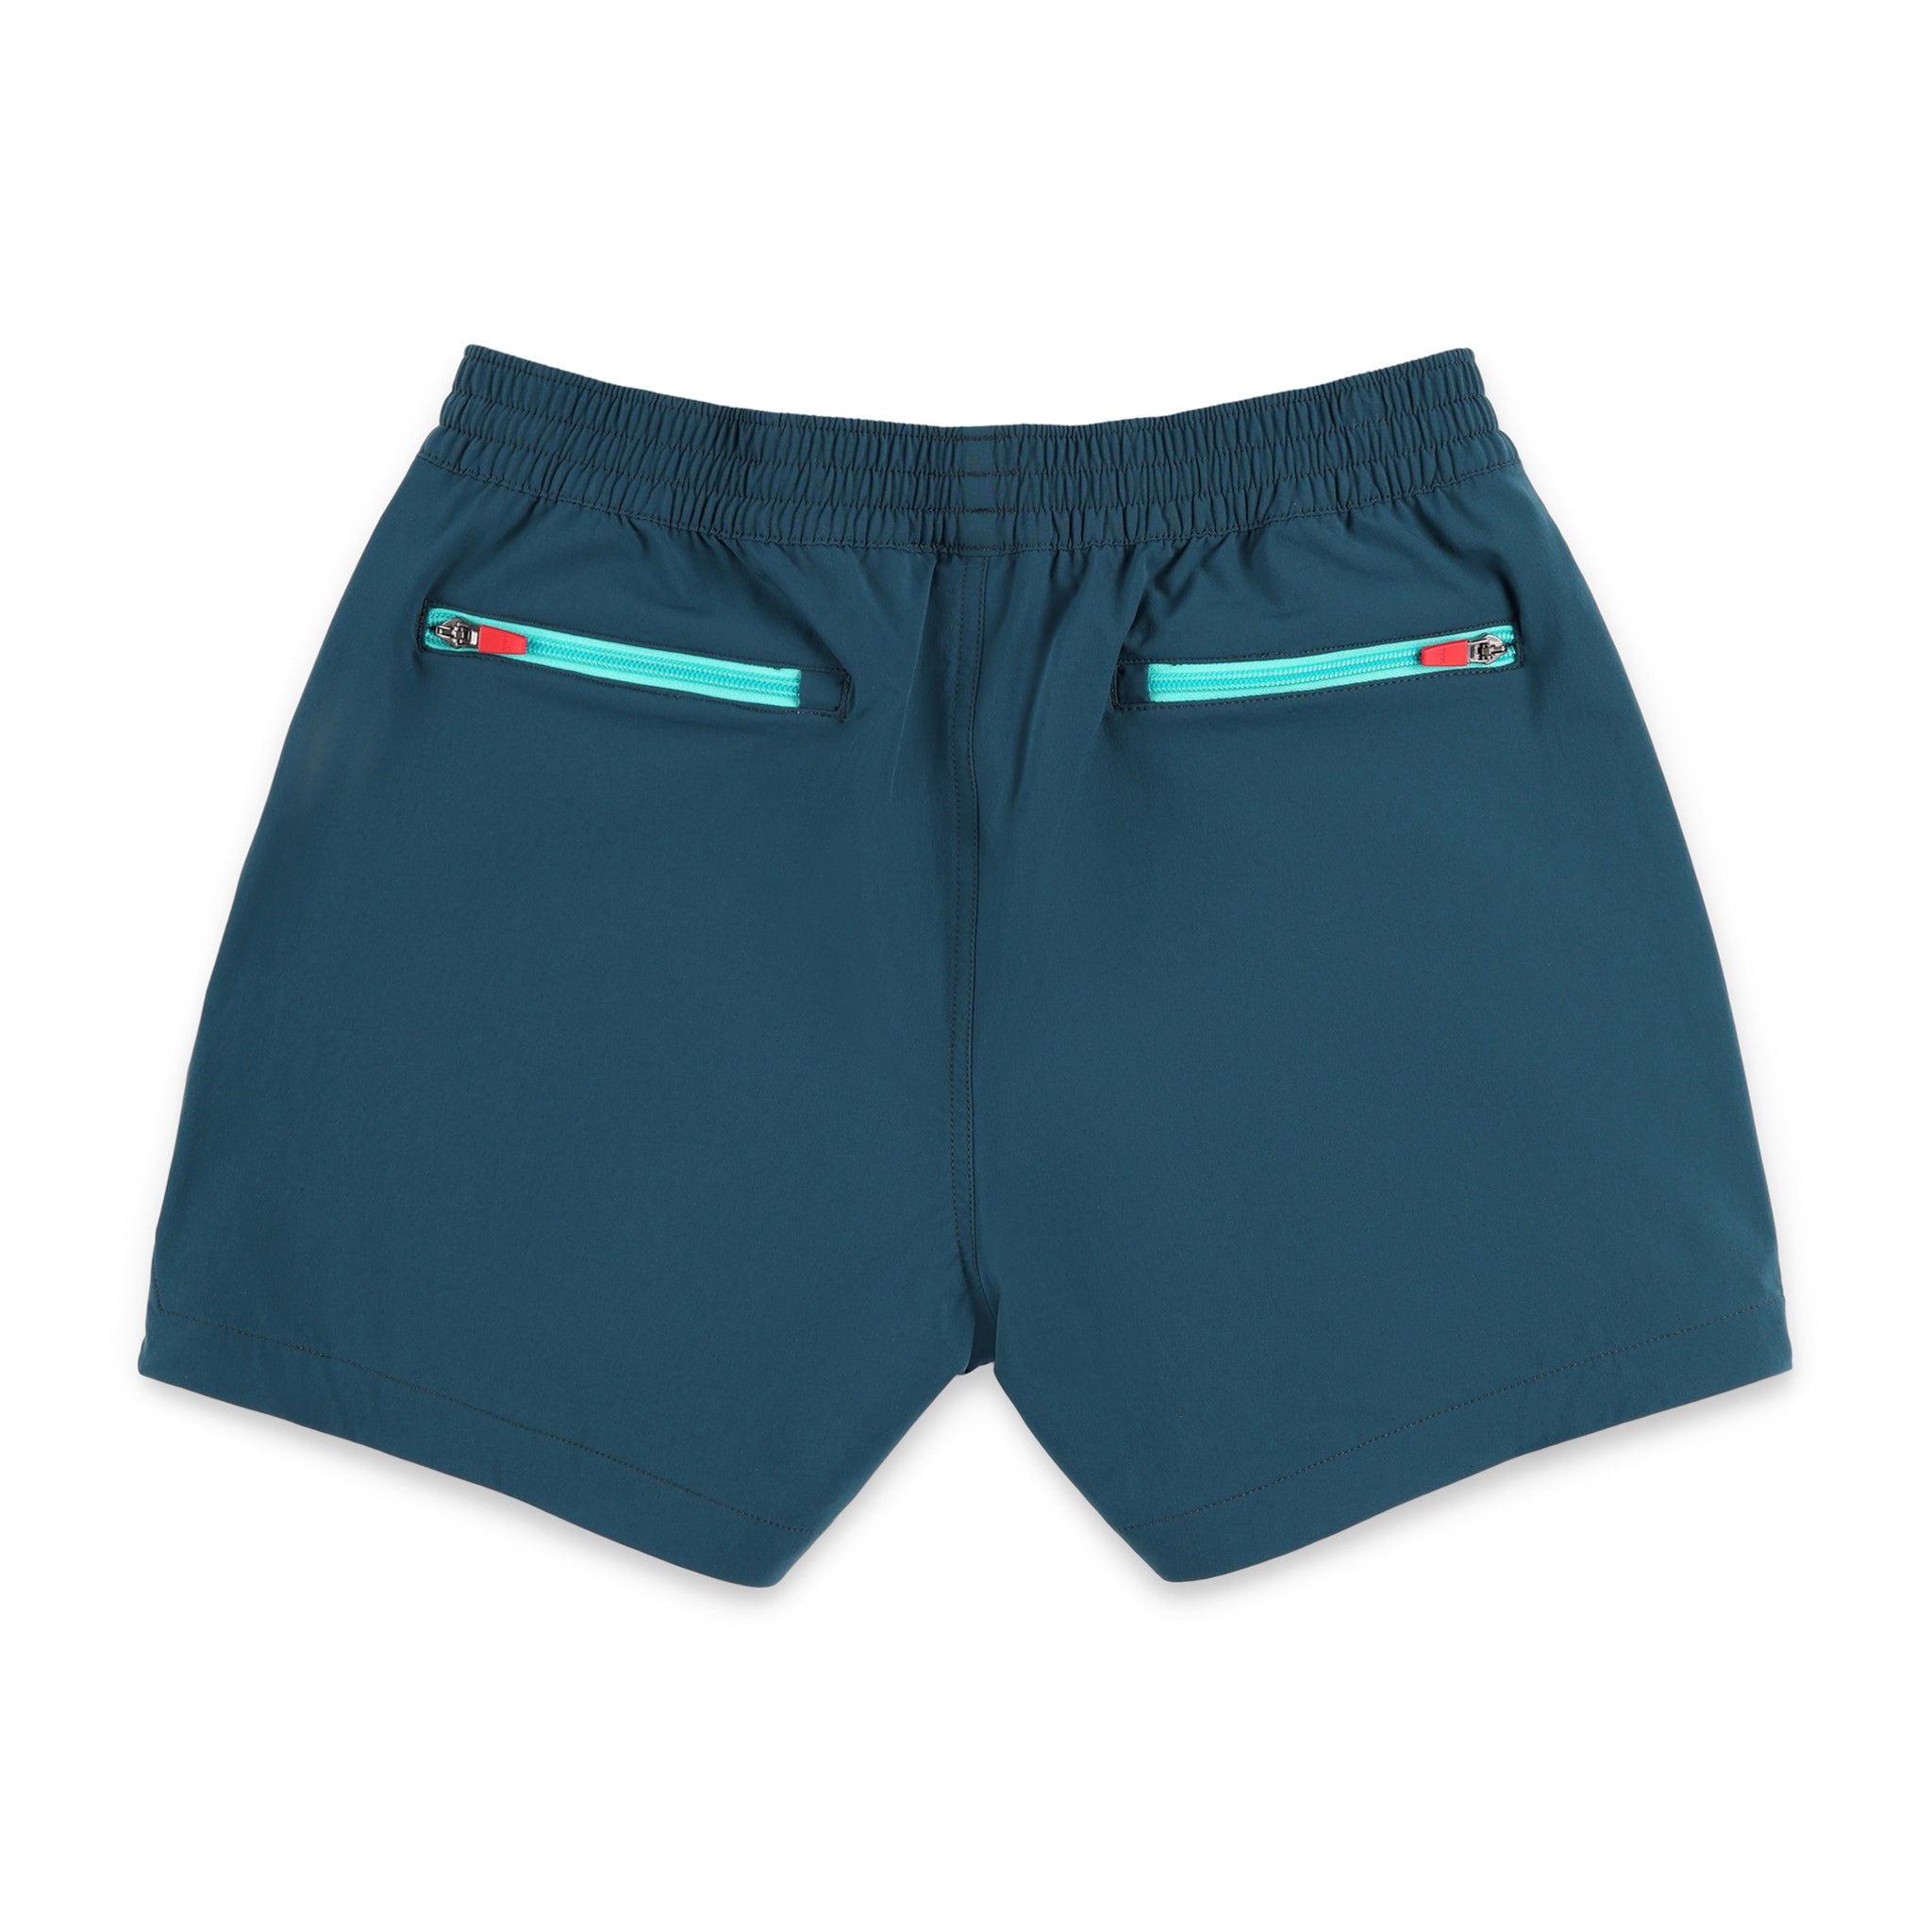 Back zipper pockets on Topo Designs Women's Global lightweight quick dry travel Shorts in "Pond Blue".